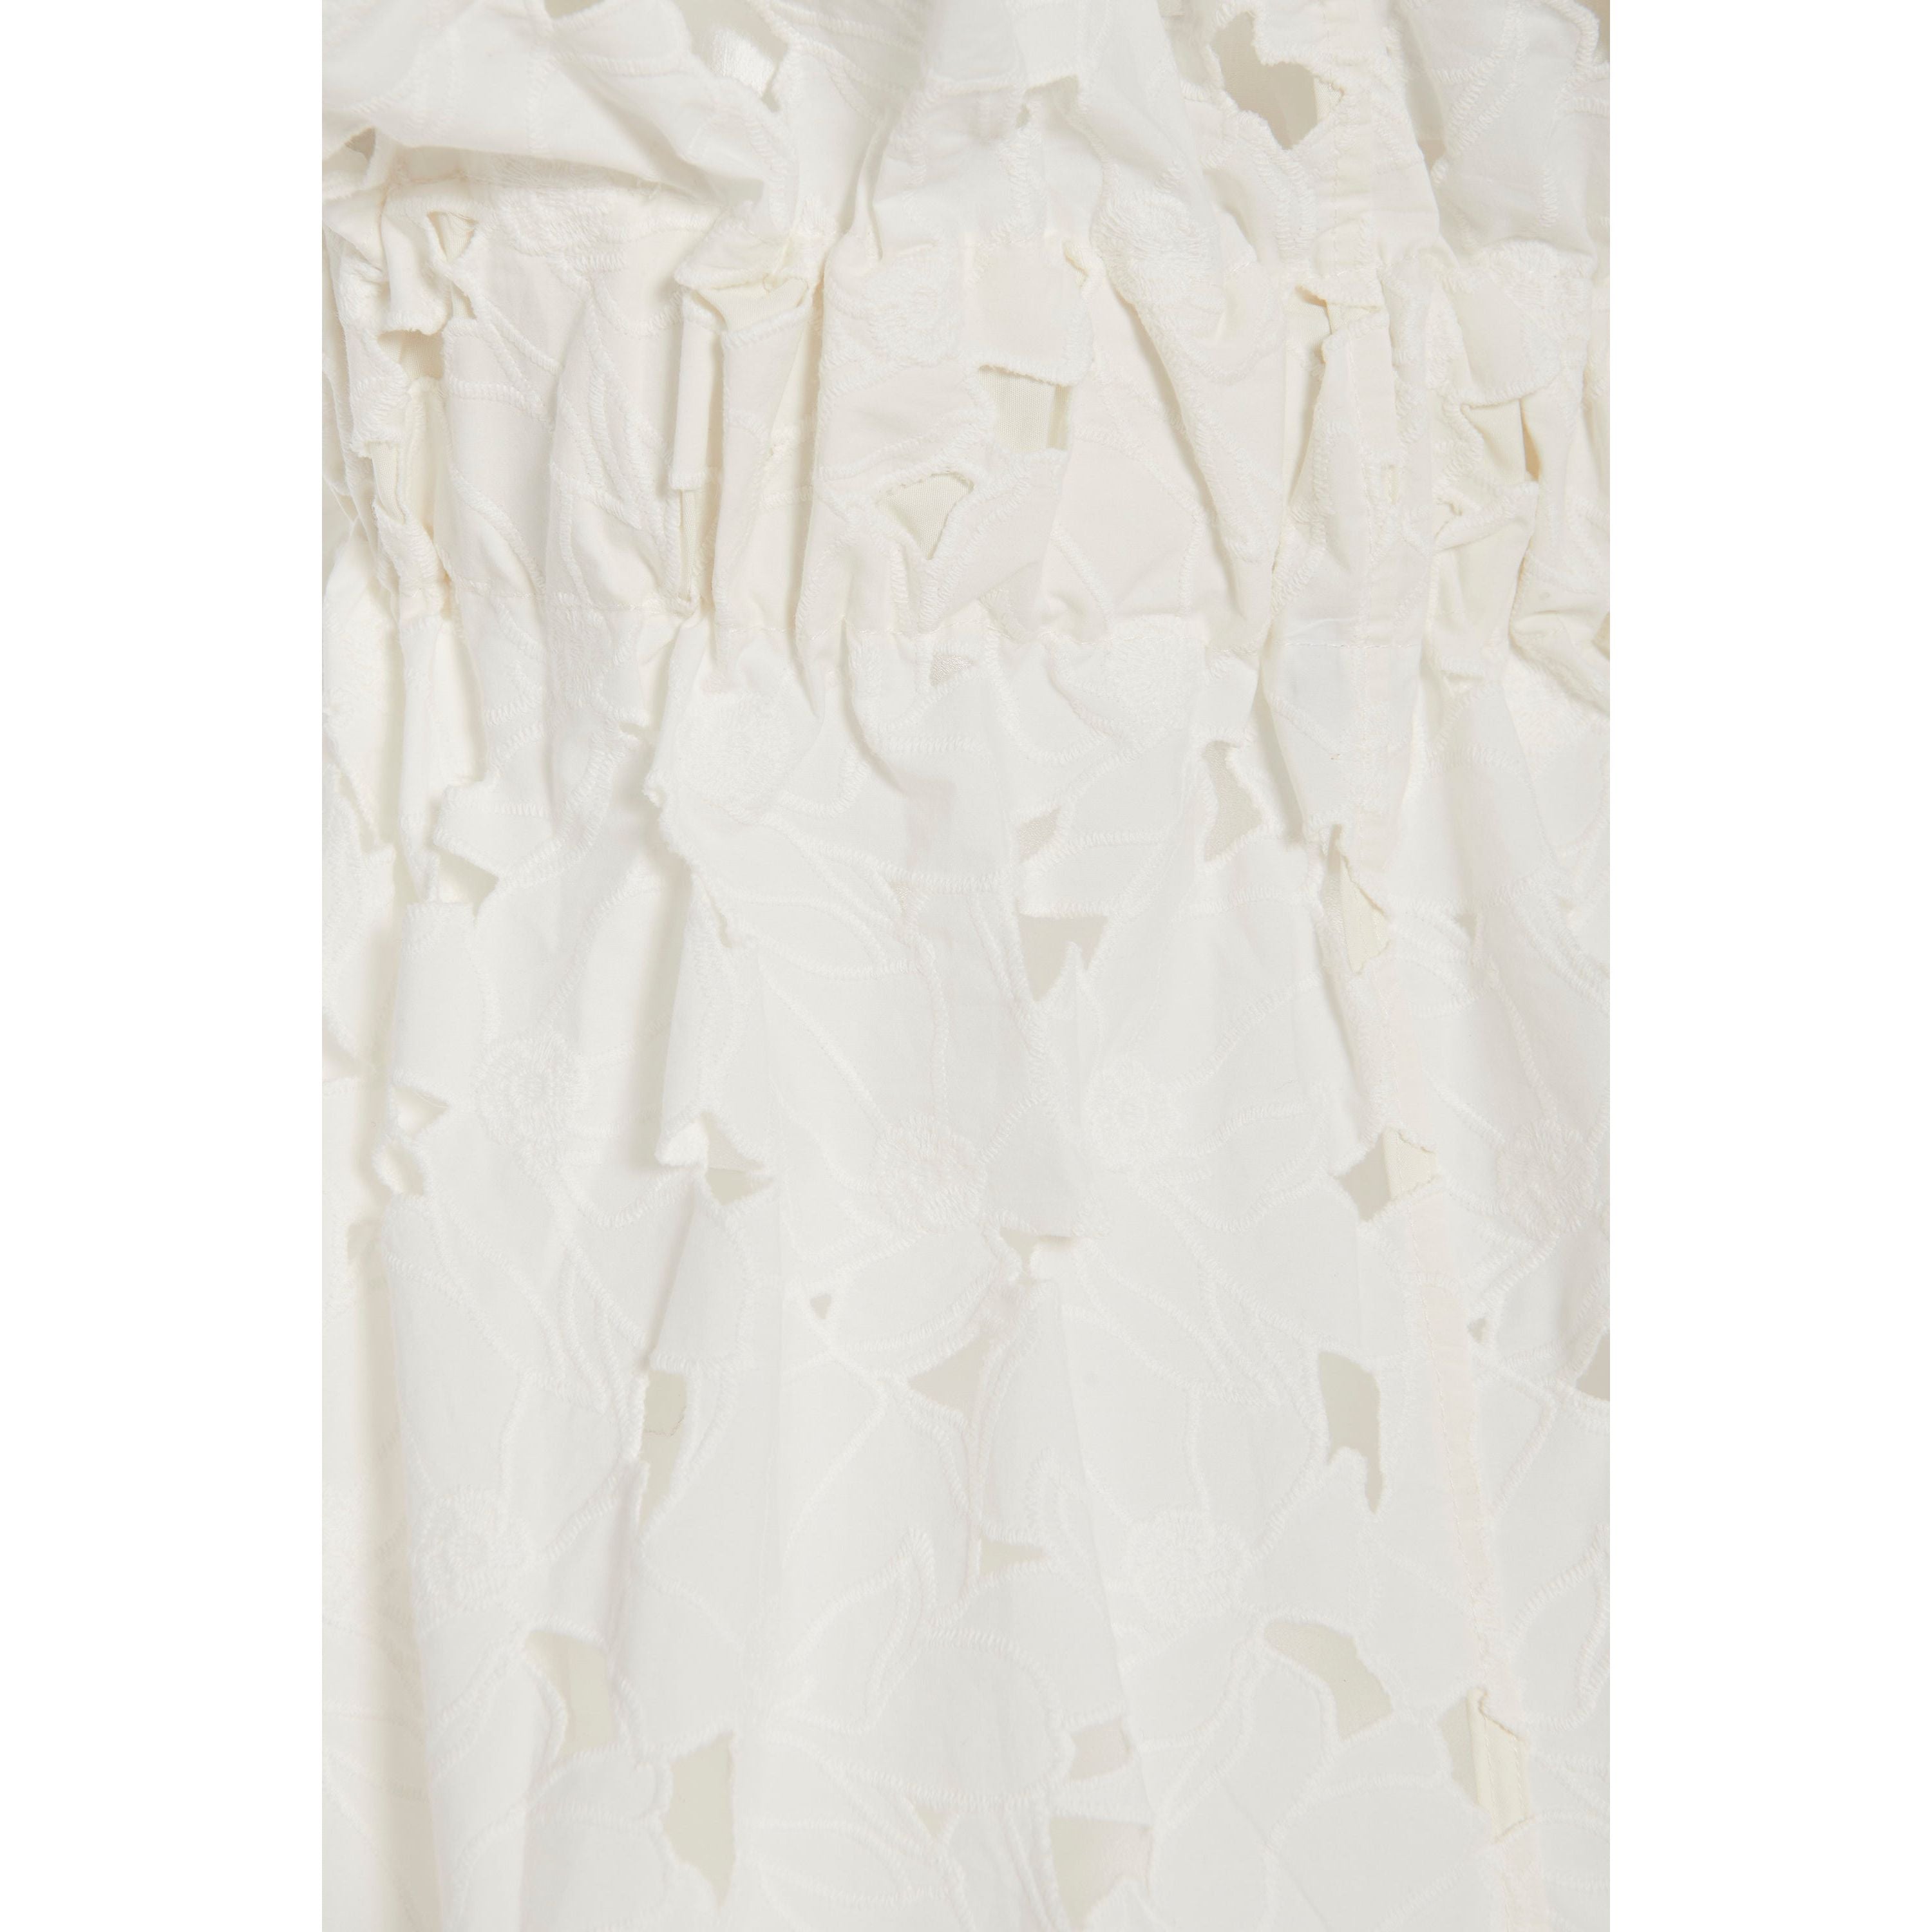 Women's Jaime Dress in White Magnolia Blossom Lace by Casey Marks